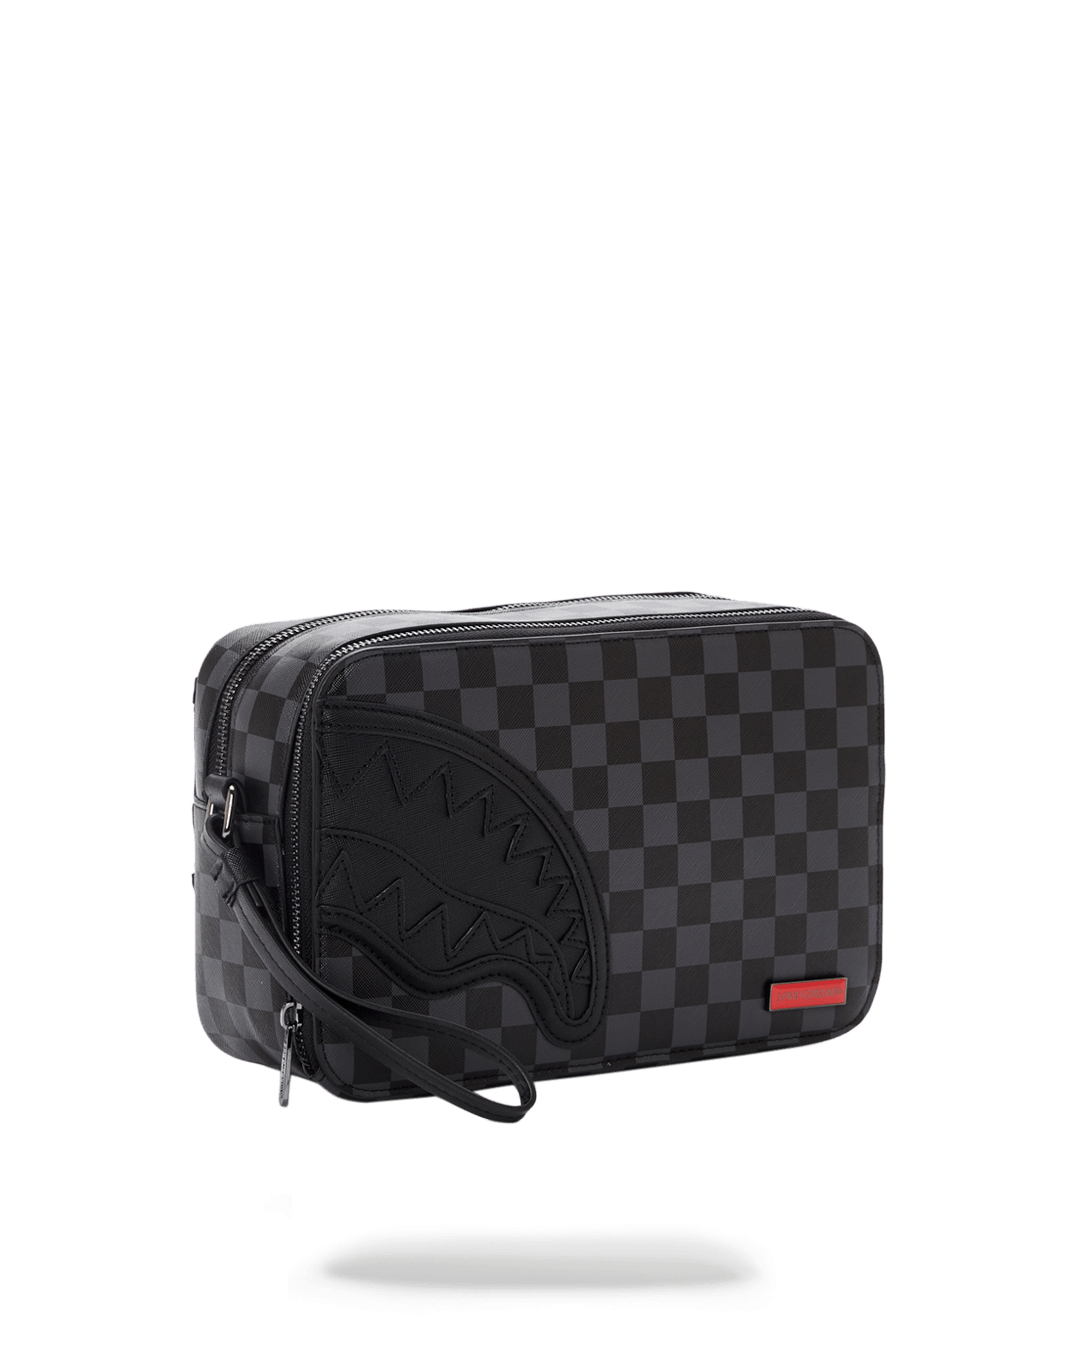 HENNY BLACK TOILETRY BAG - HIGH QUALITY AND INEXPENSIVE - HENNY BLACK TOILETRY BAG HIGH QUALITY AND INEXPENSIVE-01-2